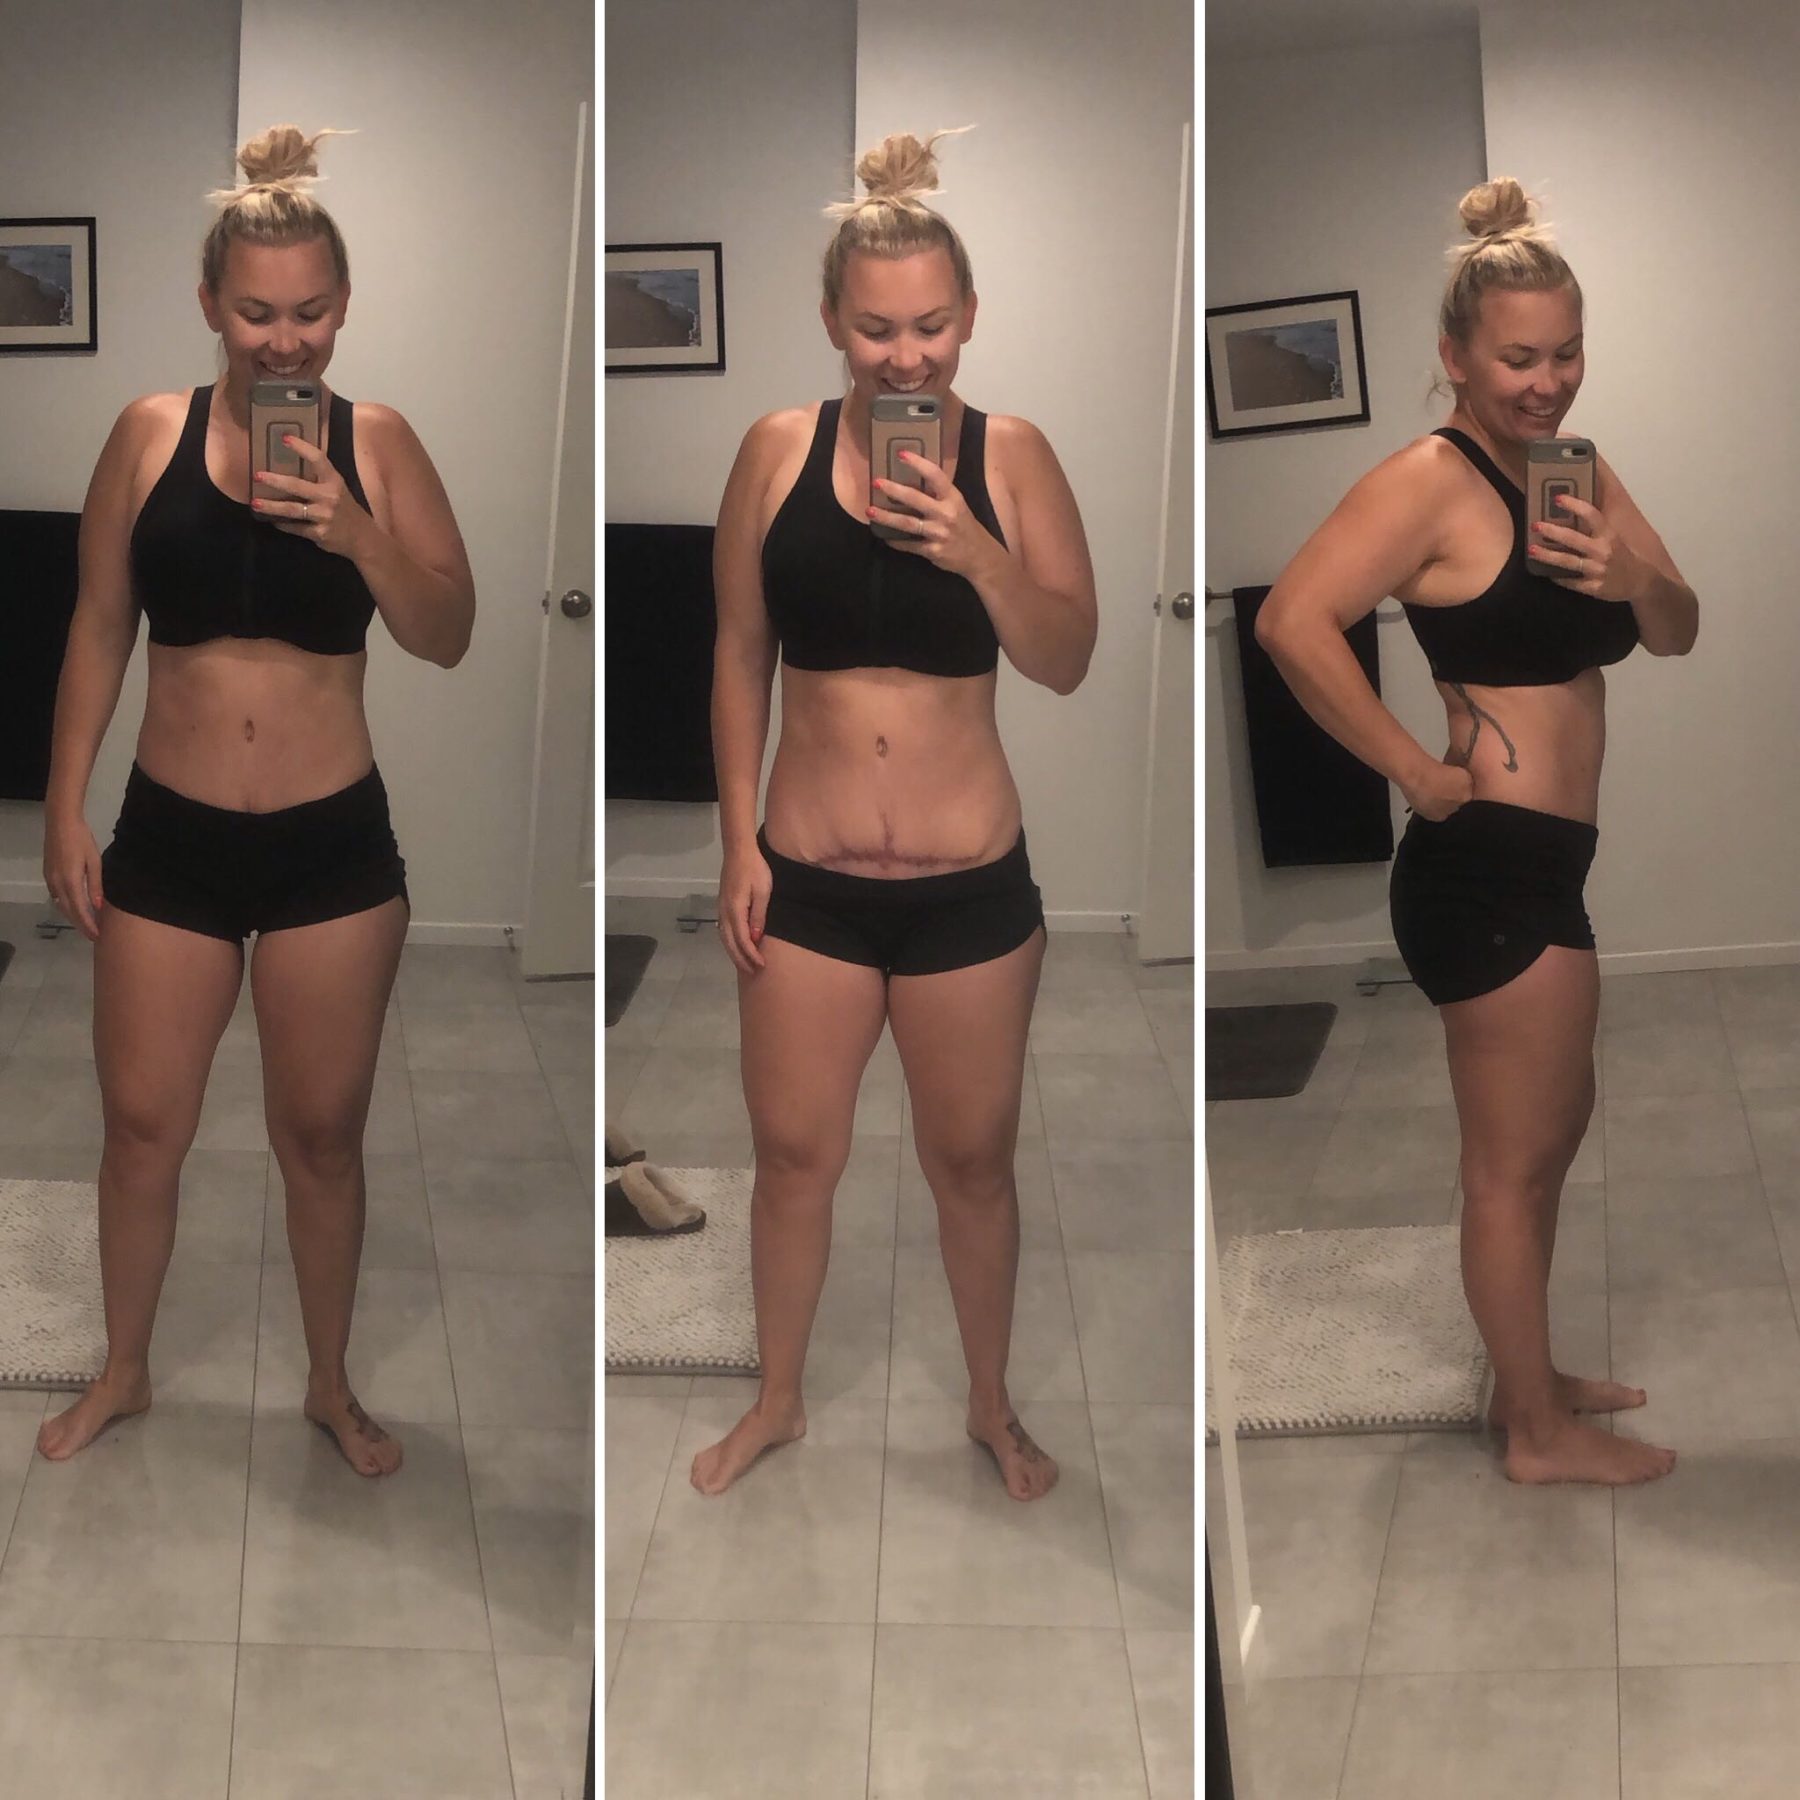 A 6w postpartum update after Tummytuck! Let me know if you have